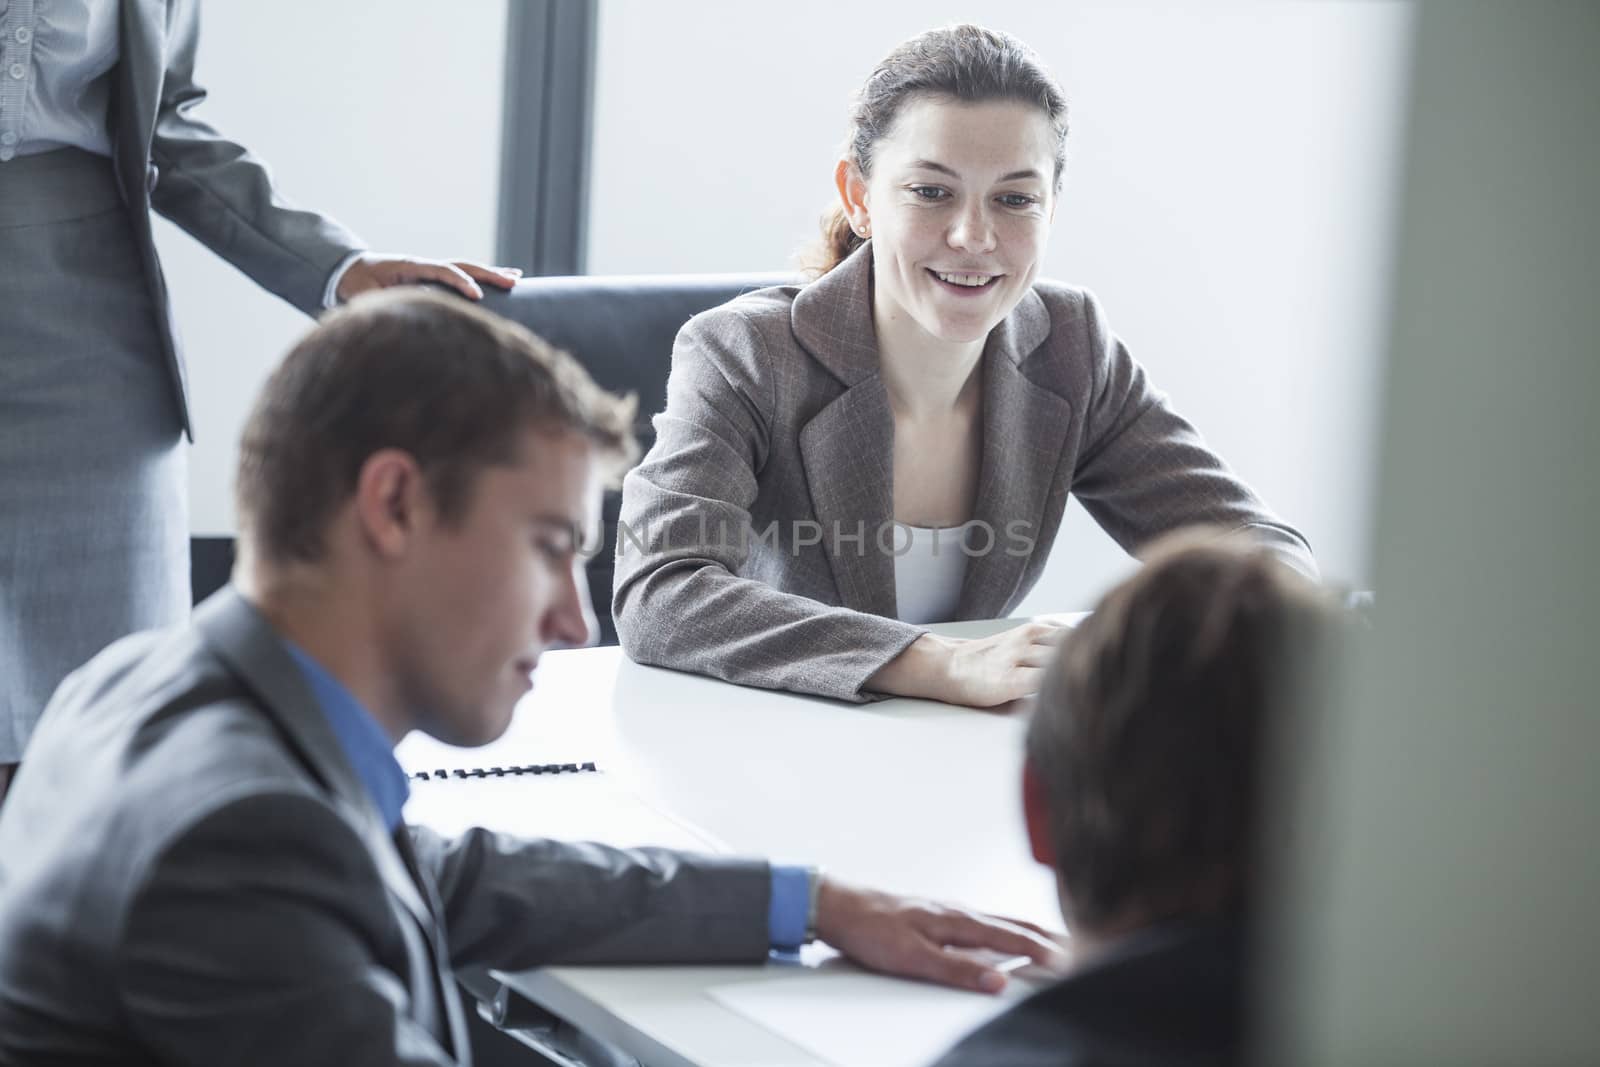 Four smiling business people sitting at a table and having a business meeting in the office